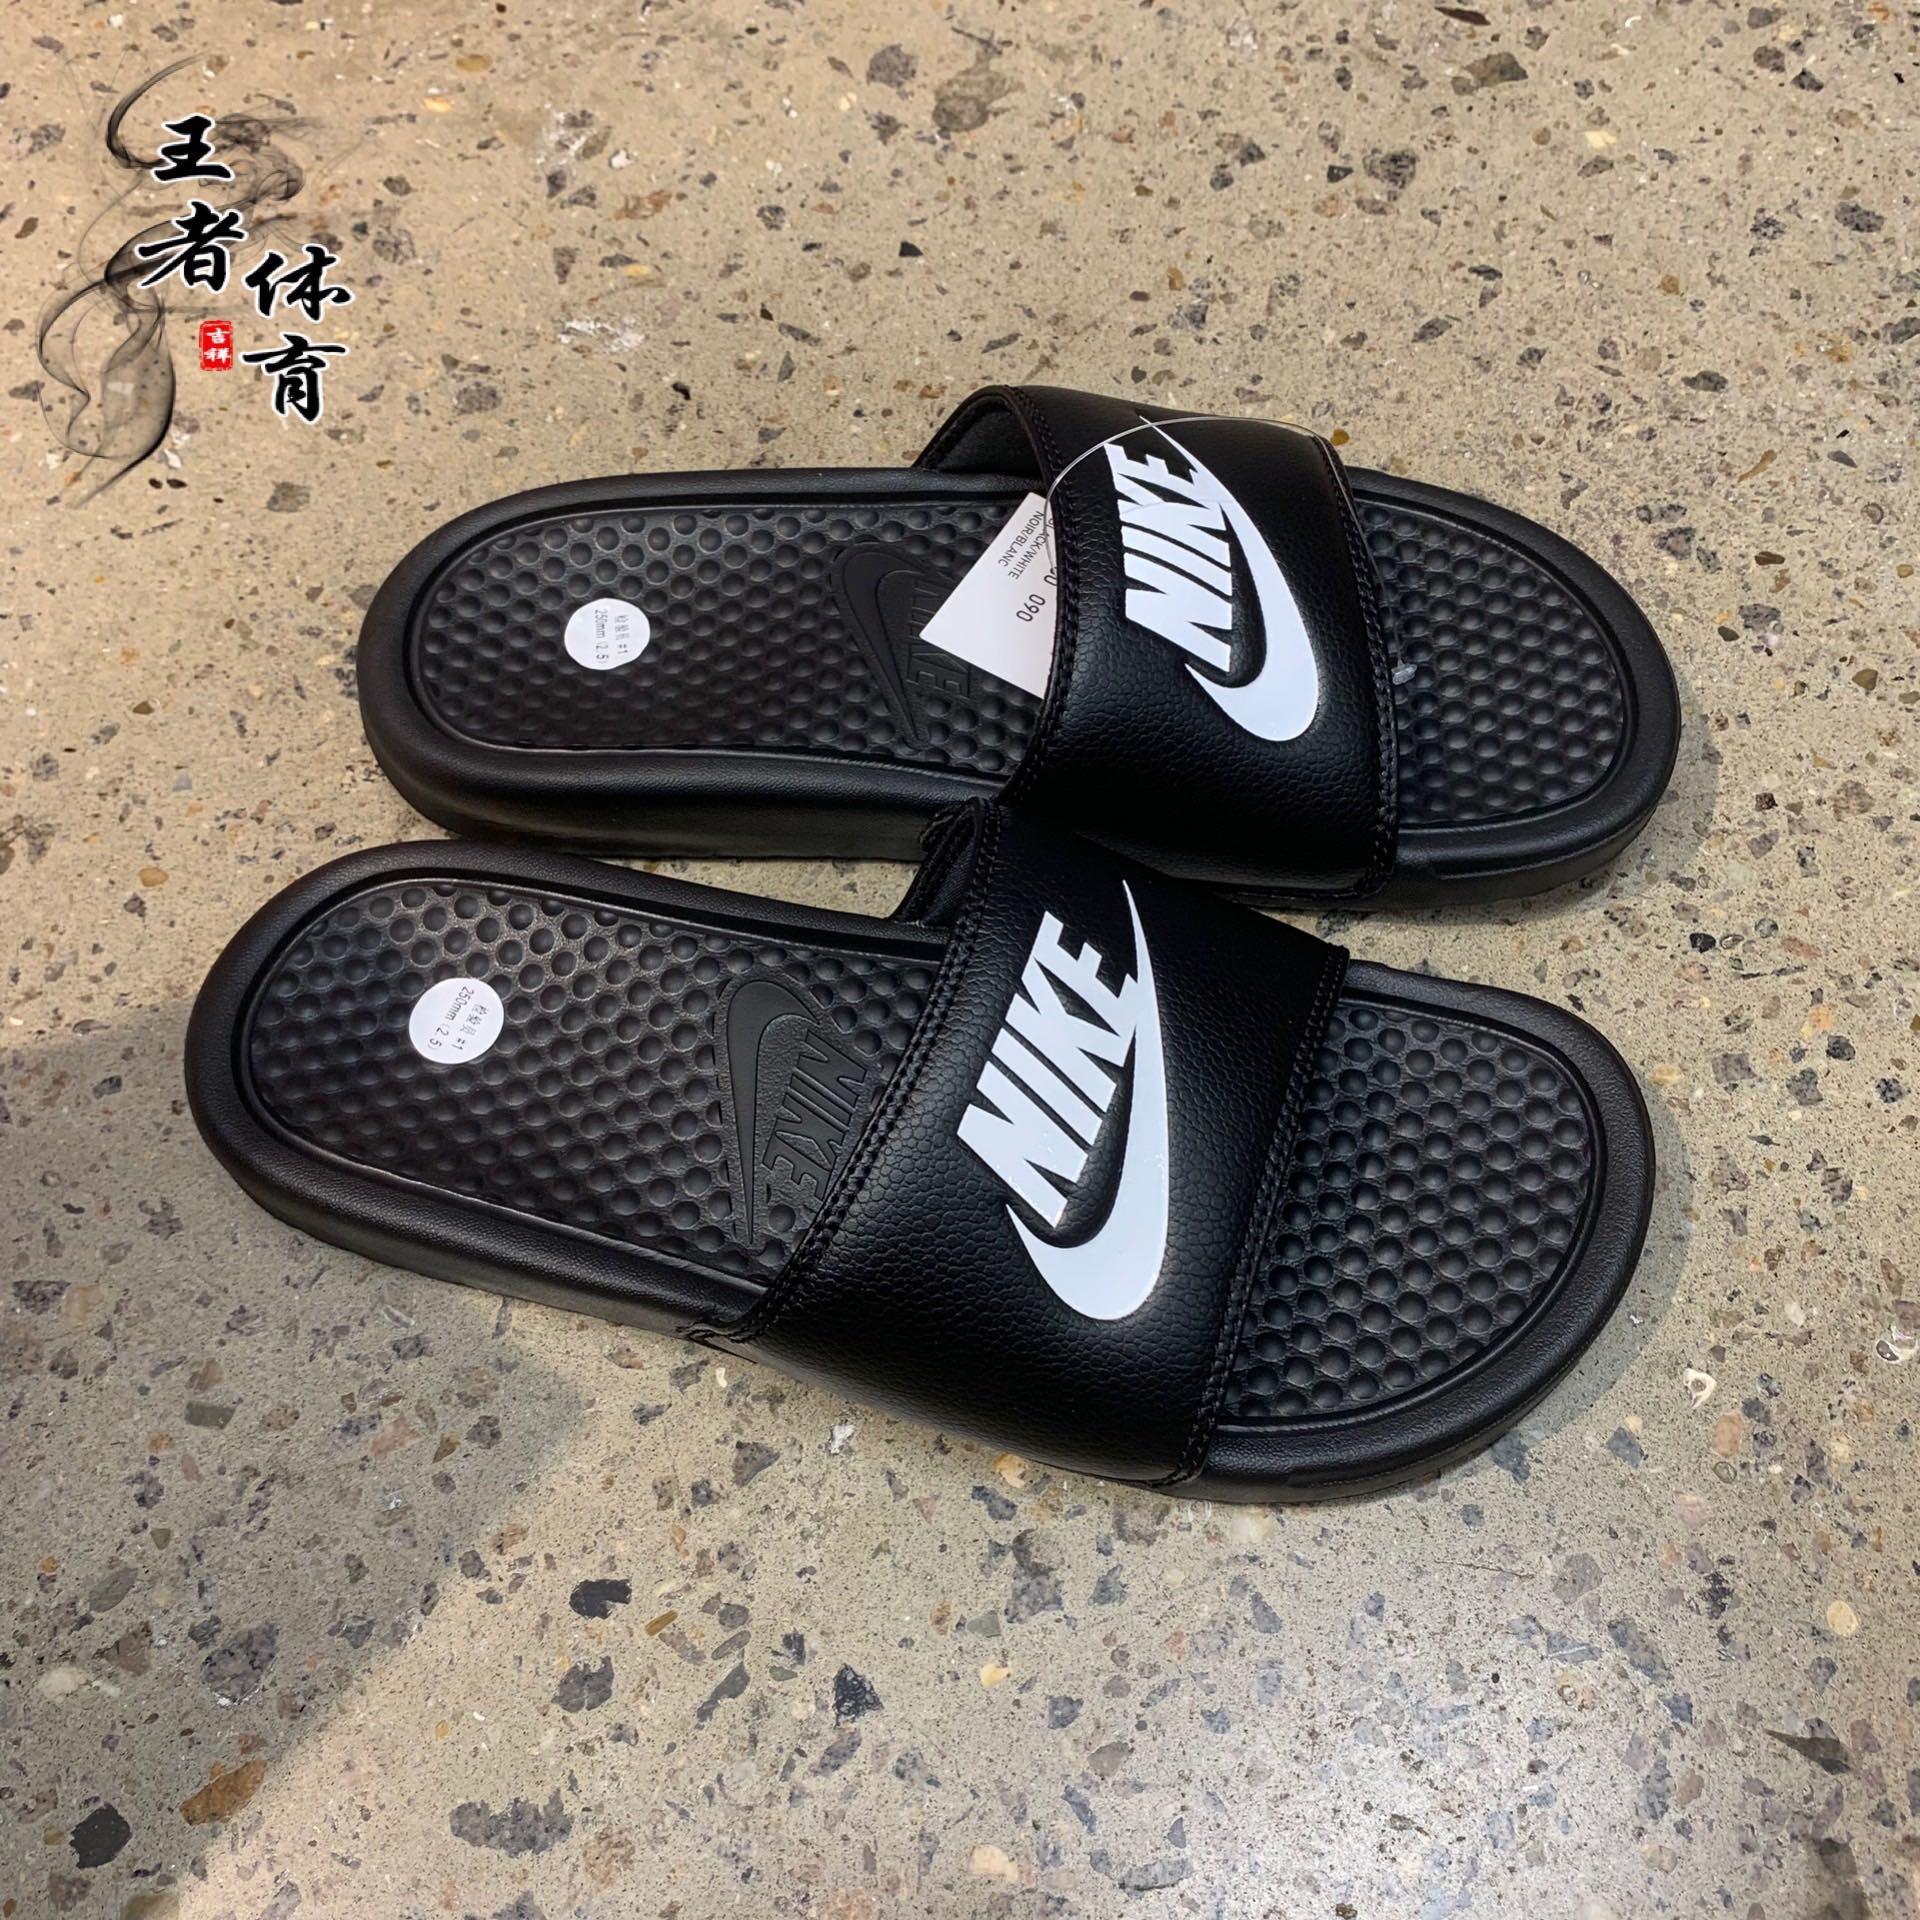 Discover 153+ nike slippers online india latest